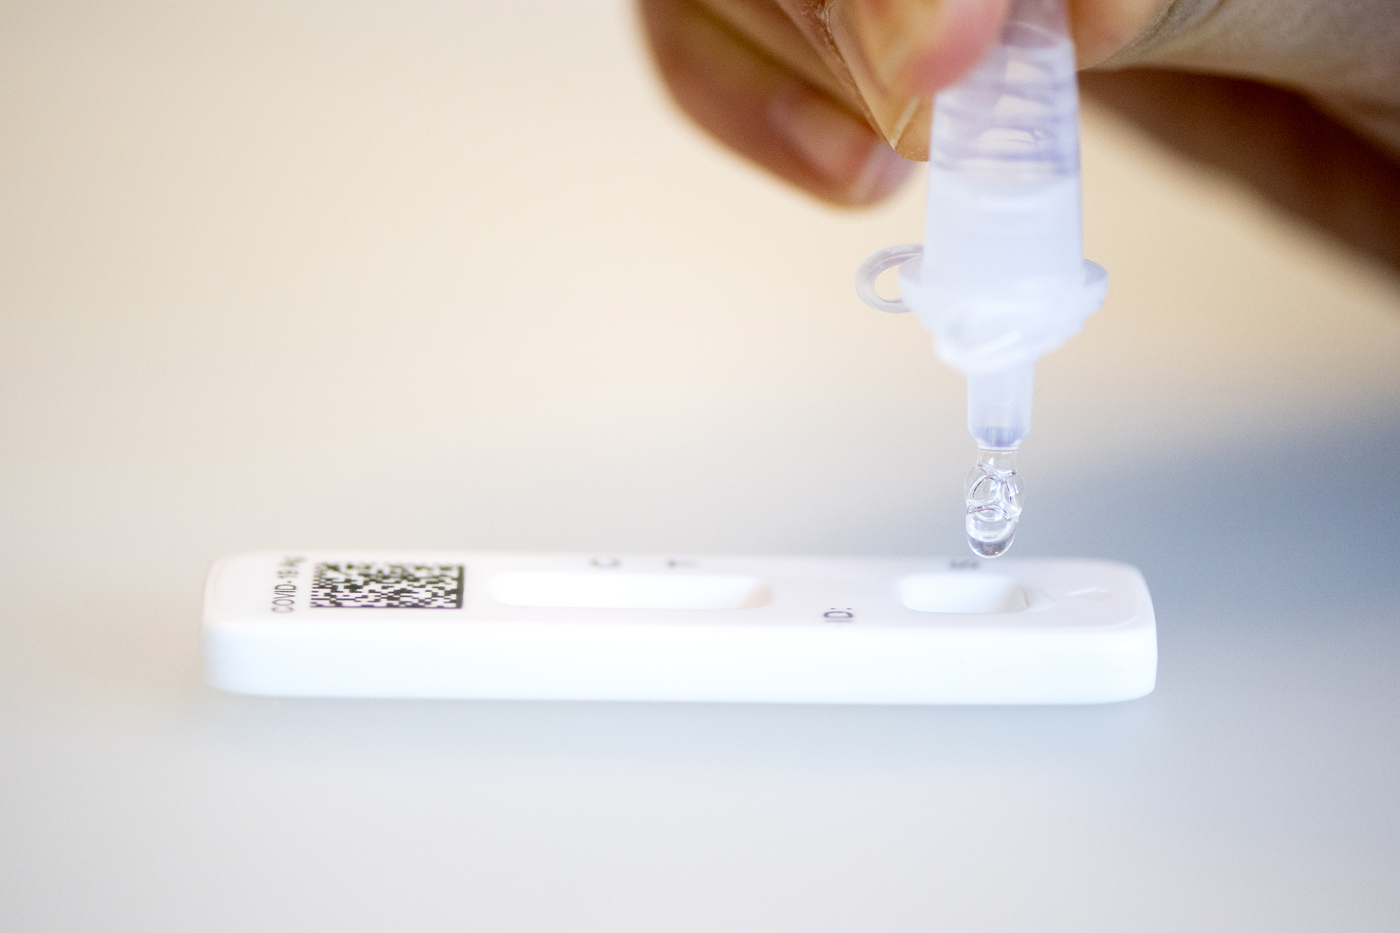 a drop of solution goes into an at-home COVID test